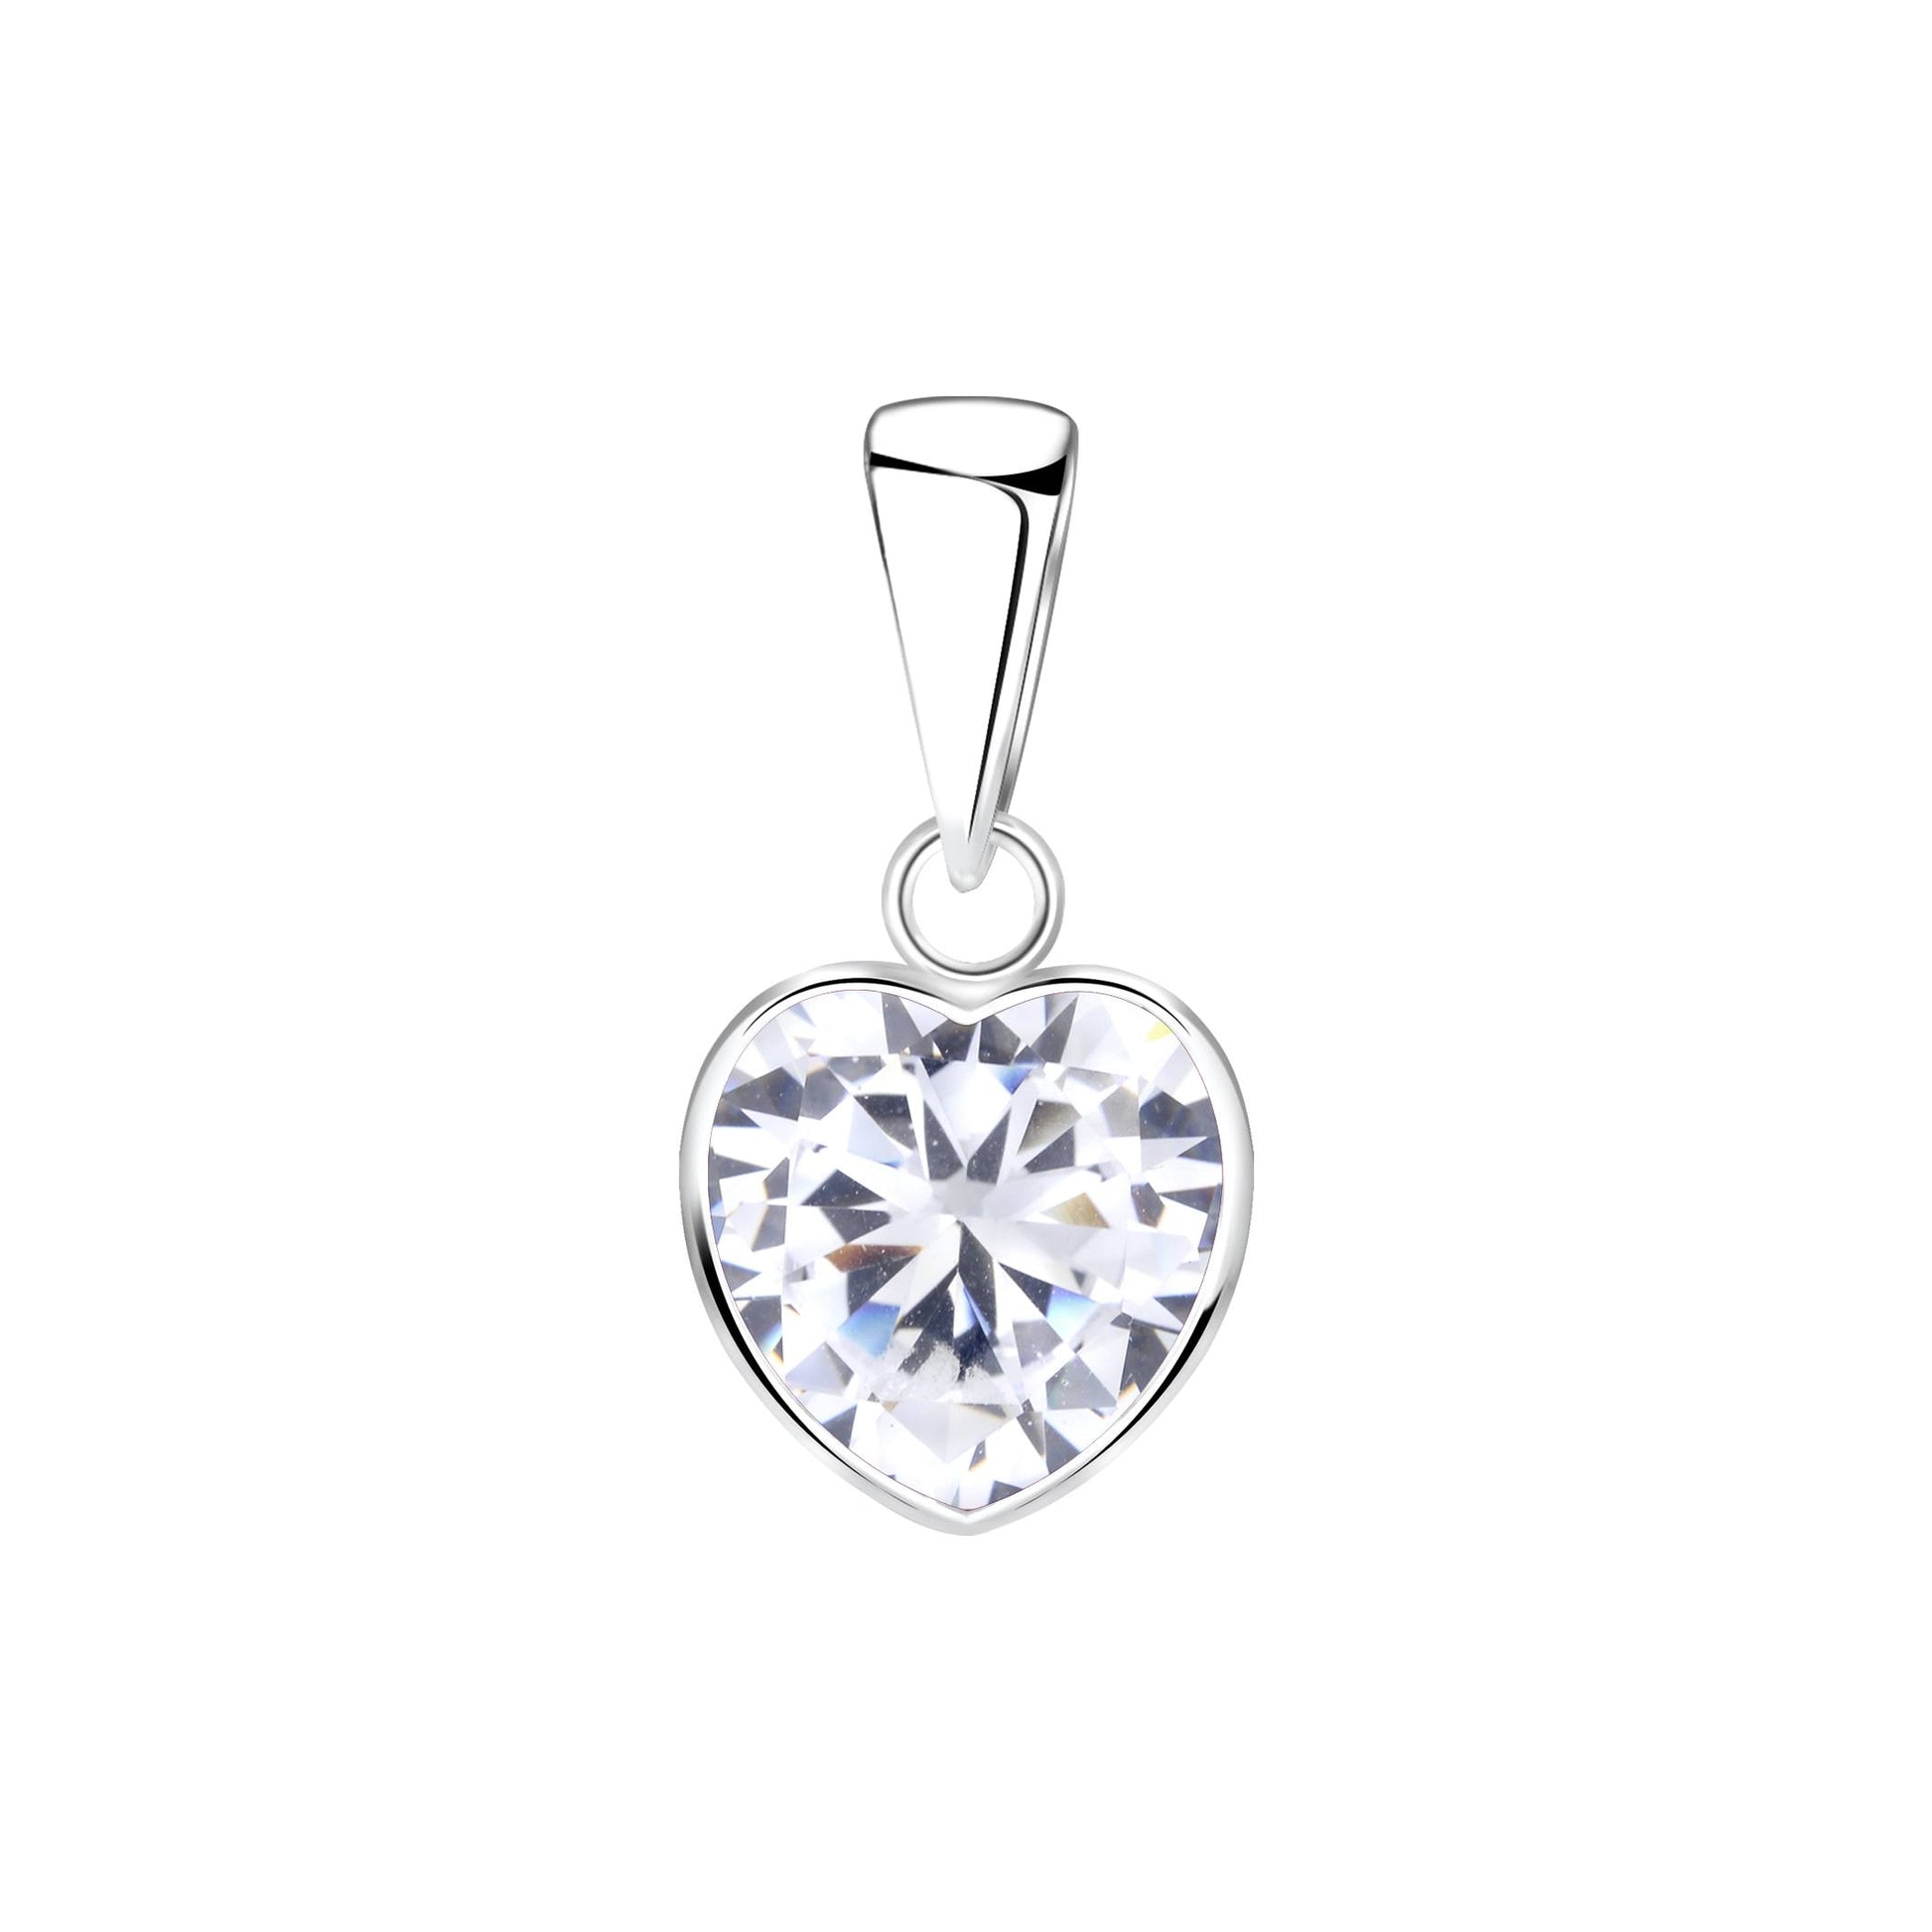 Girls Small Heart Sterling Silver Pendant